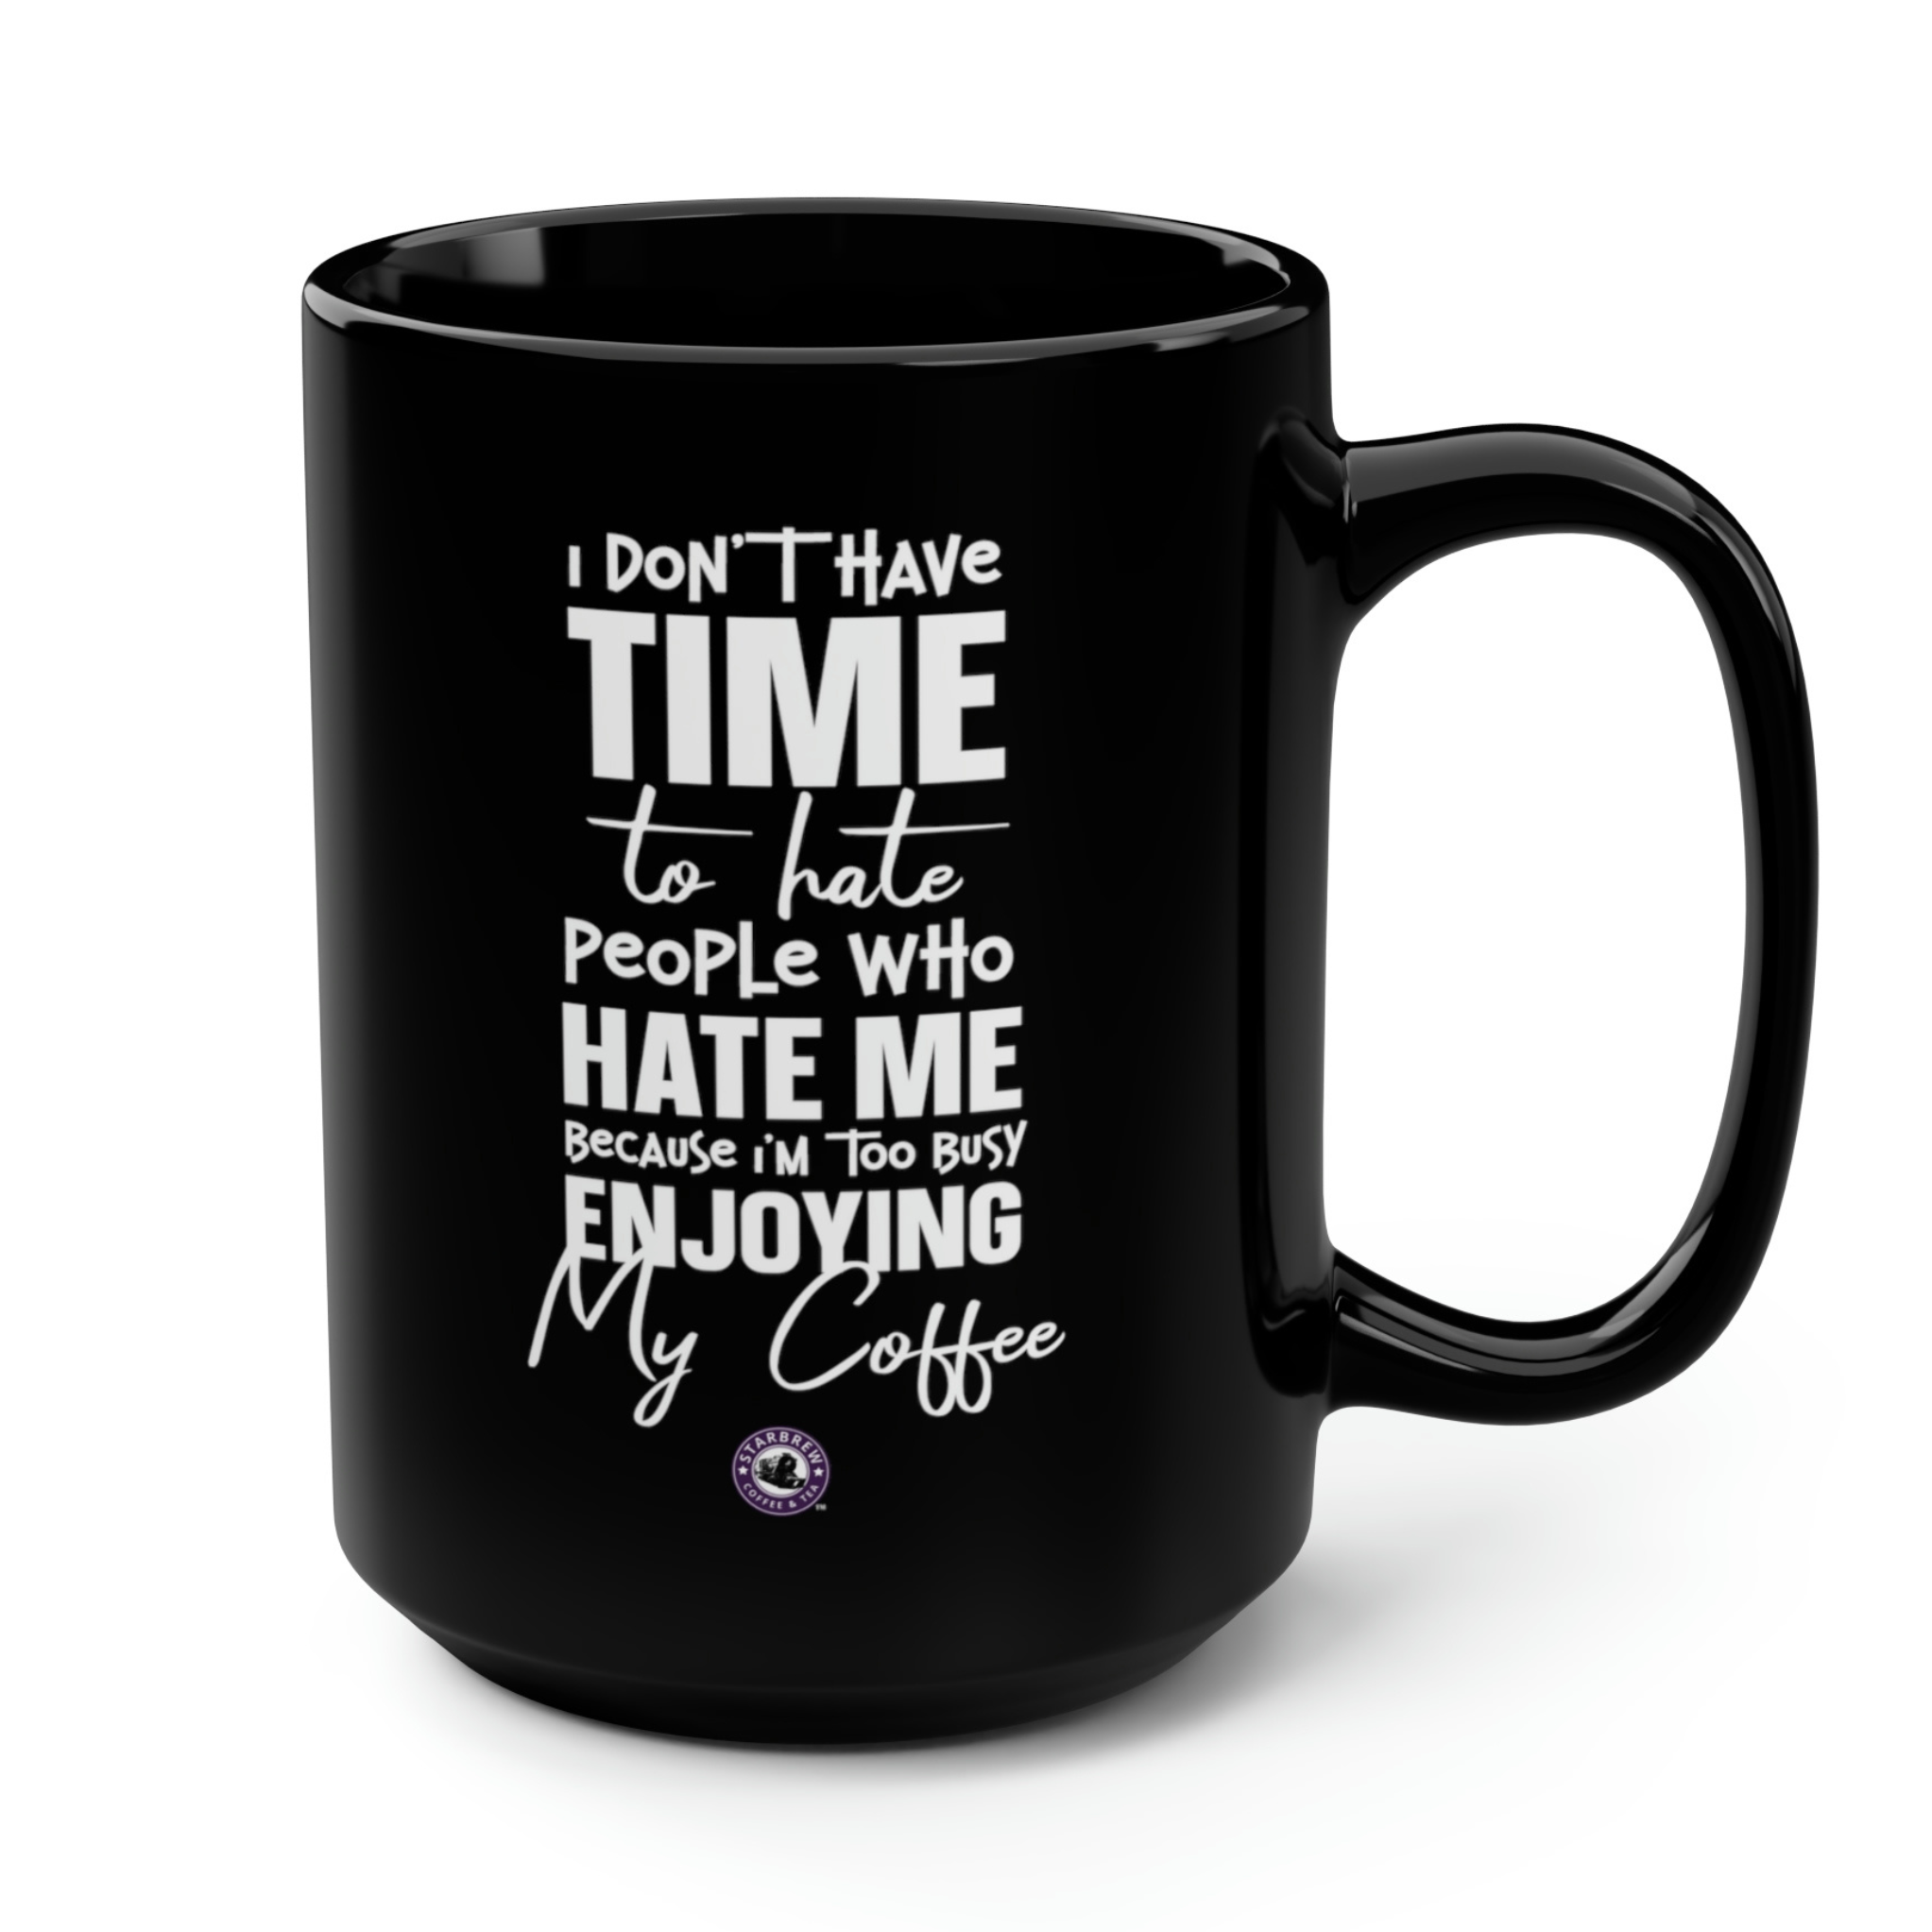 I Don’t Have Time To Hate People Who Hate Me Because I’m Too Busy Enjoying My Coffee - Funny, Inspirational And Motivational 15 Oz Mug